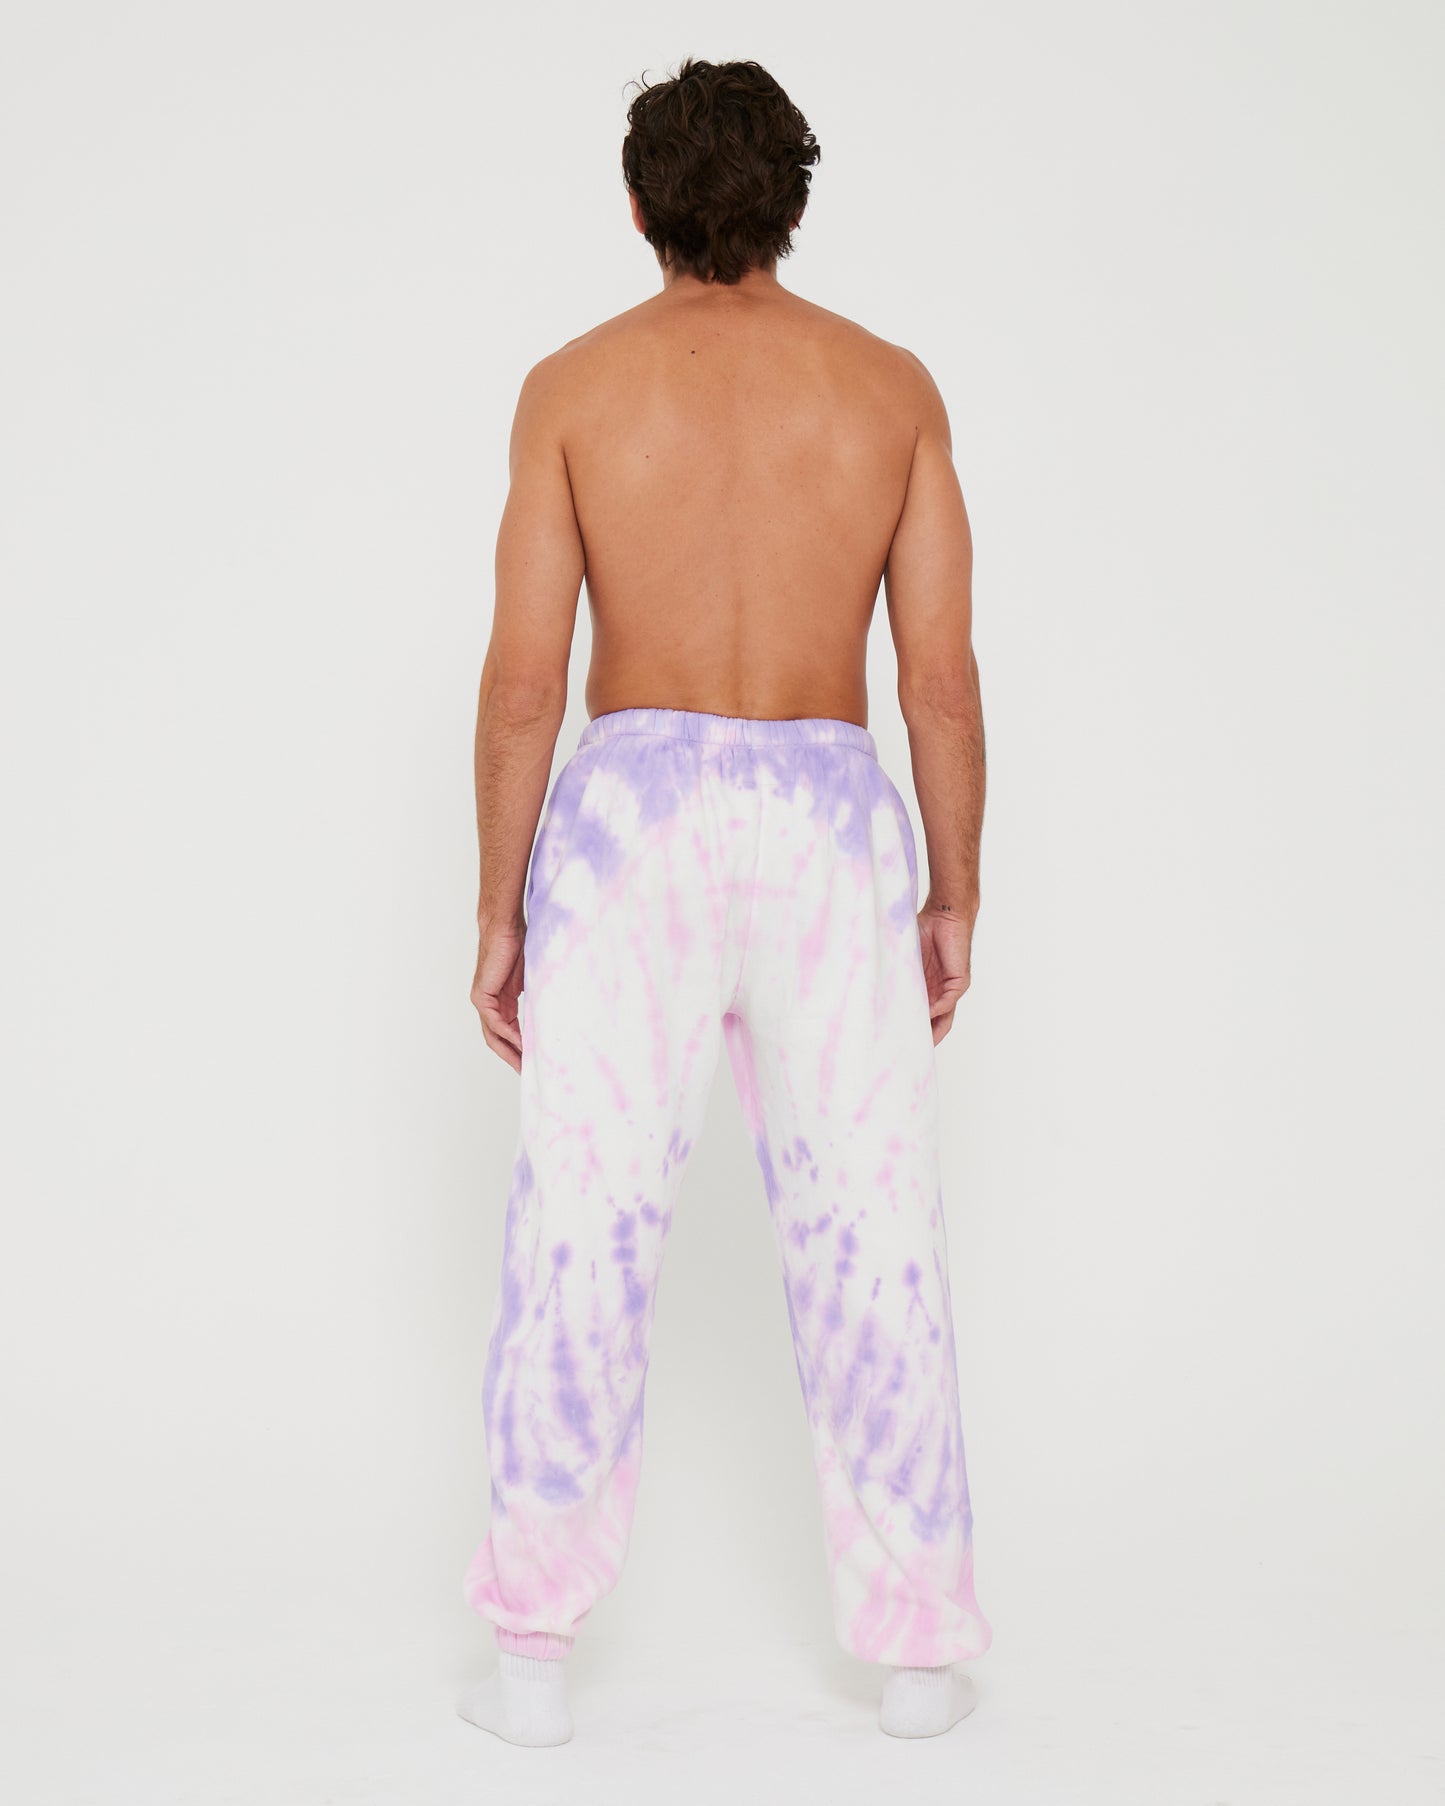 Banana Old'Scool Sweatpant - Pink and Purple Tie Dye